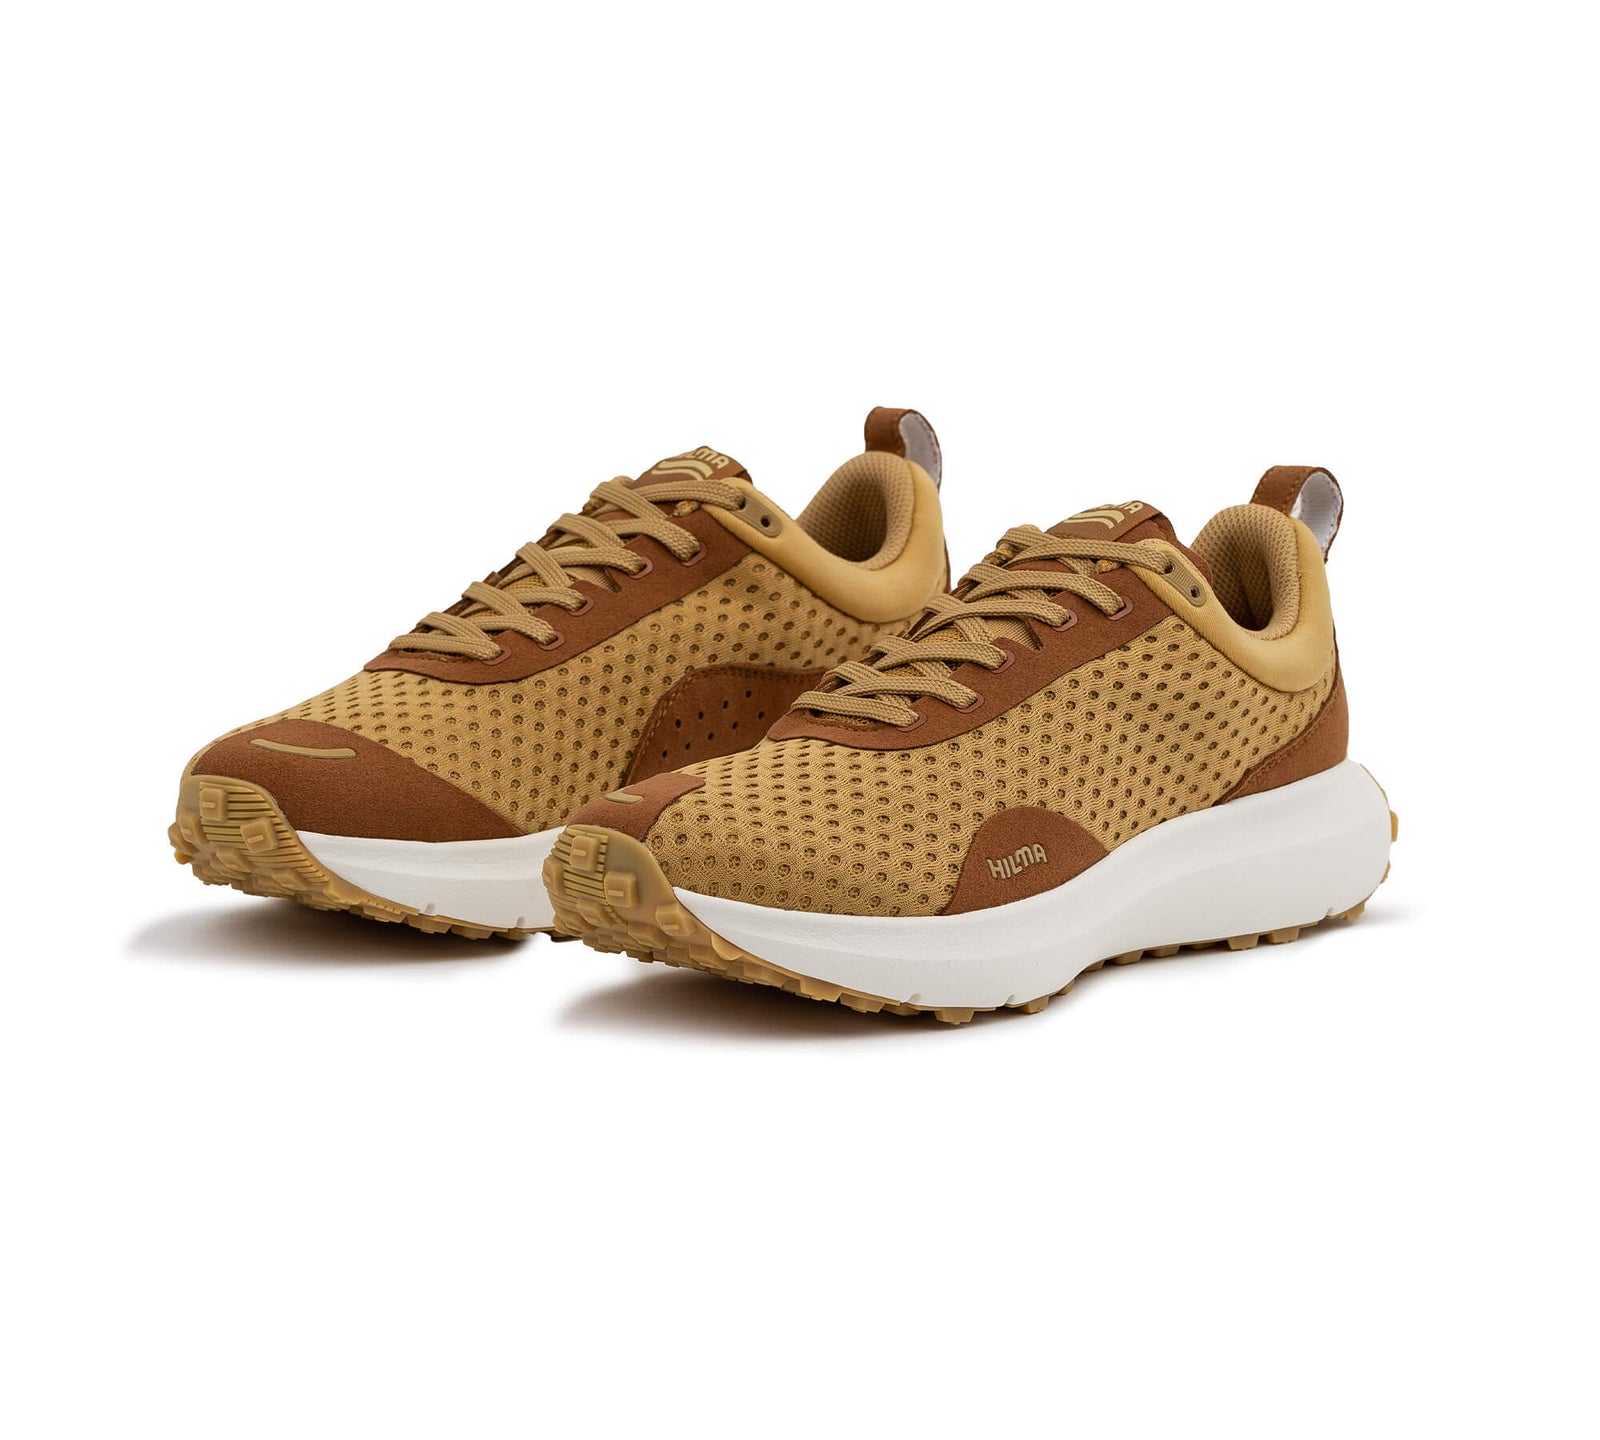 Front side view of a pair of the Everywhere Hilma Running shoe in Sandstone